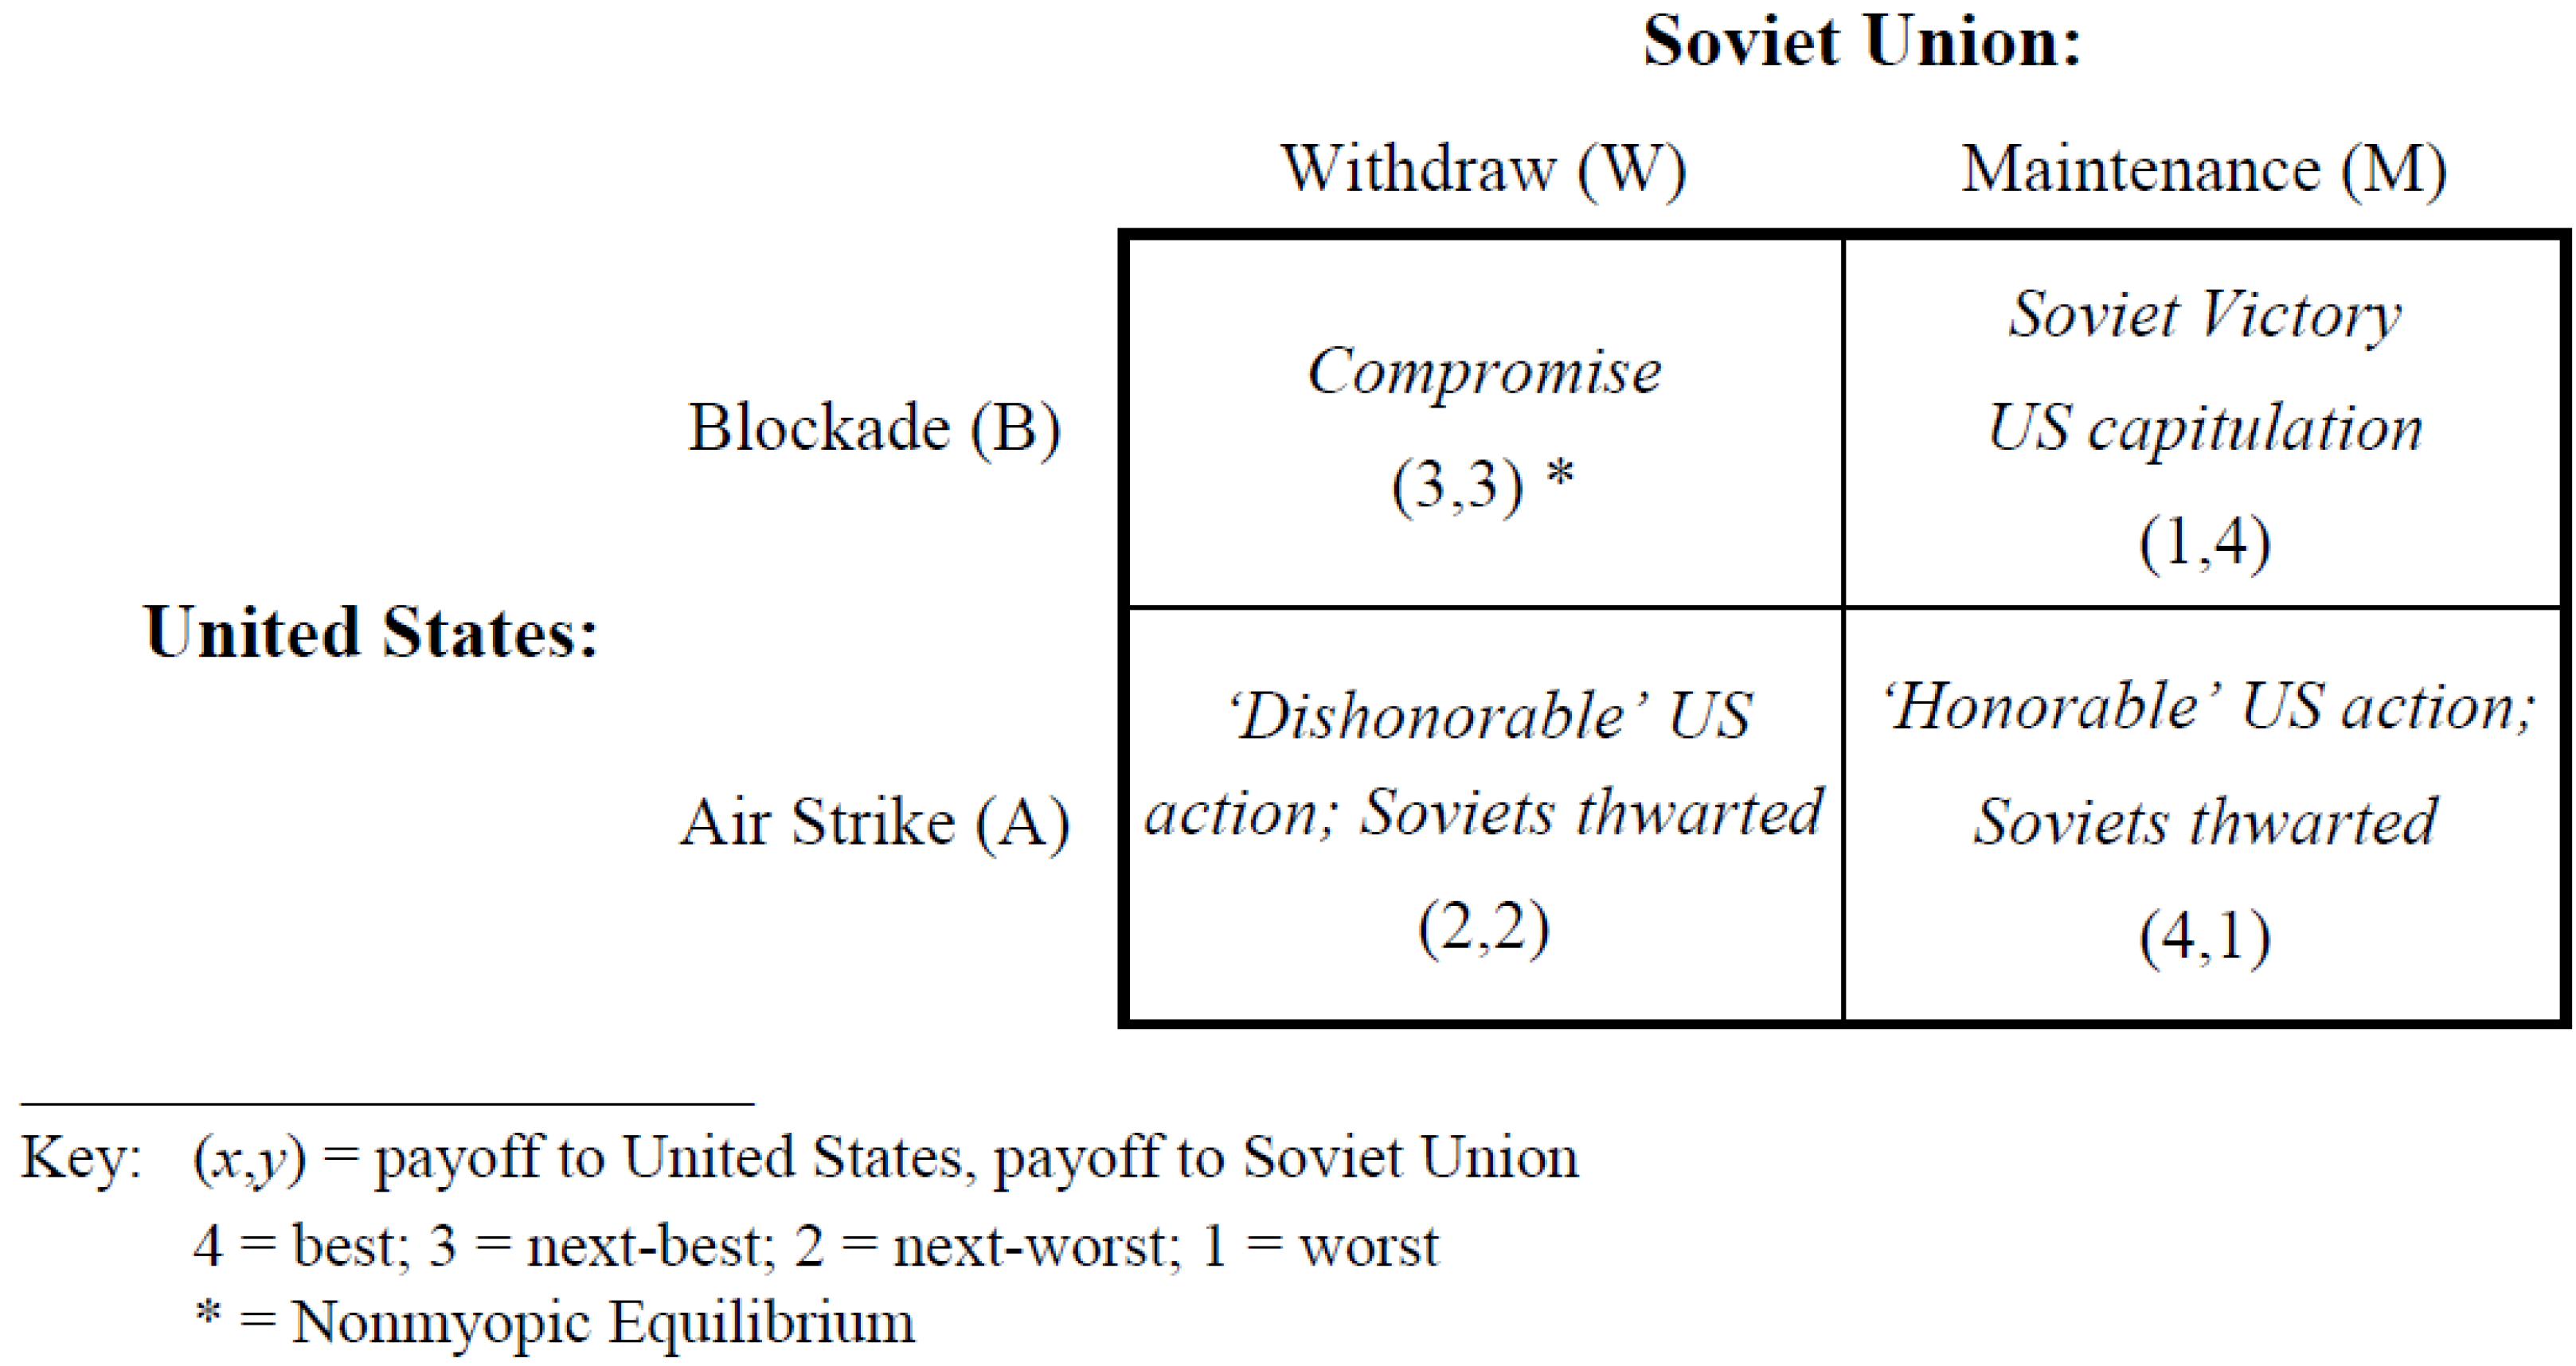 Game Theory and a New Insight into How the Cuban Missile Crisis